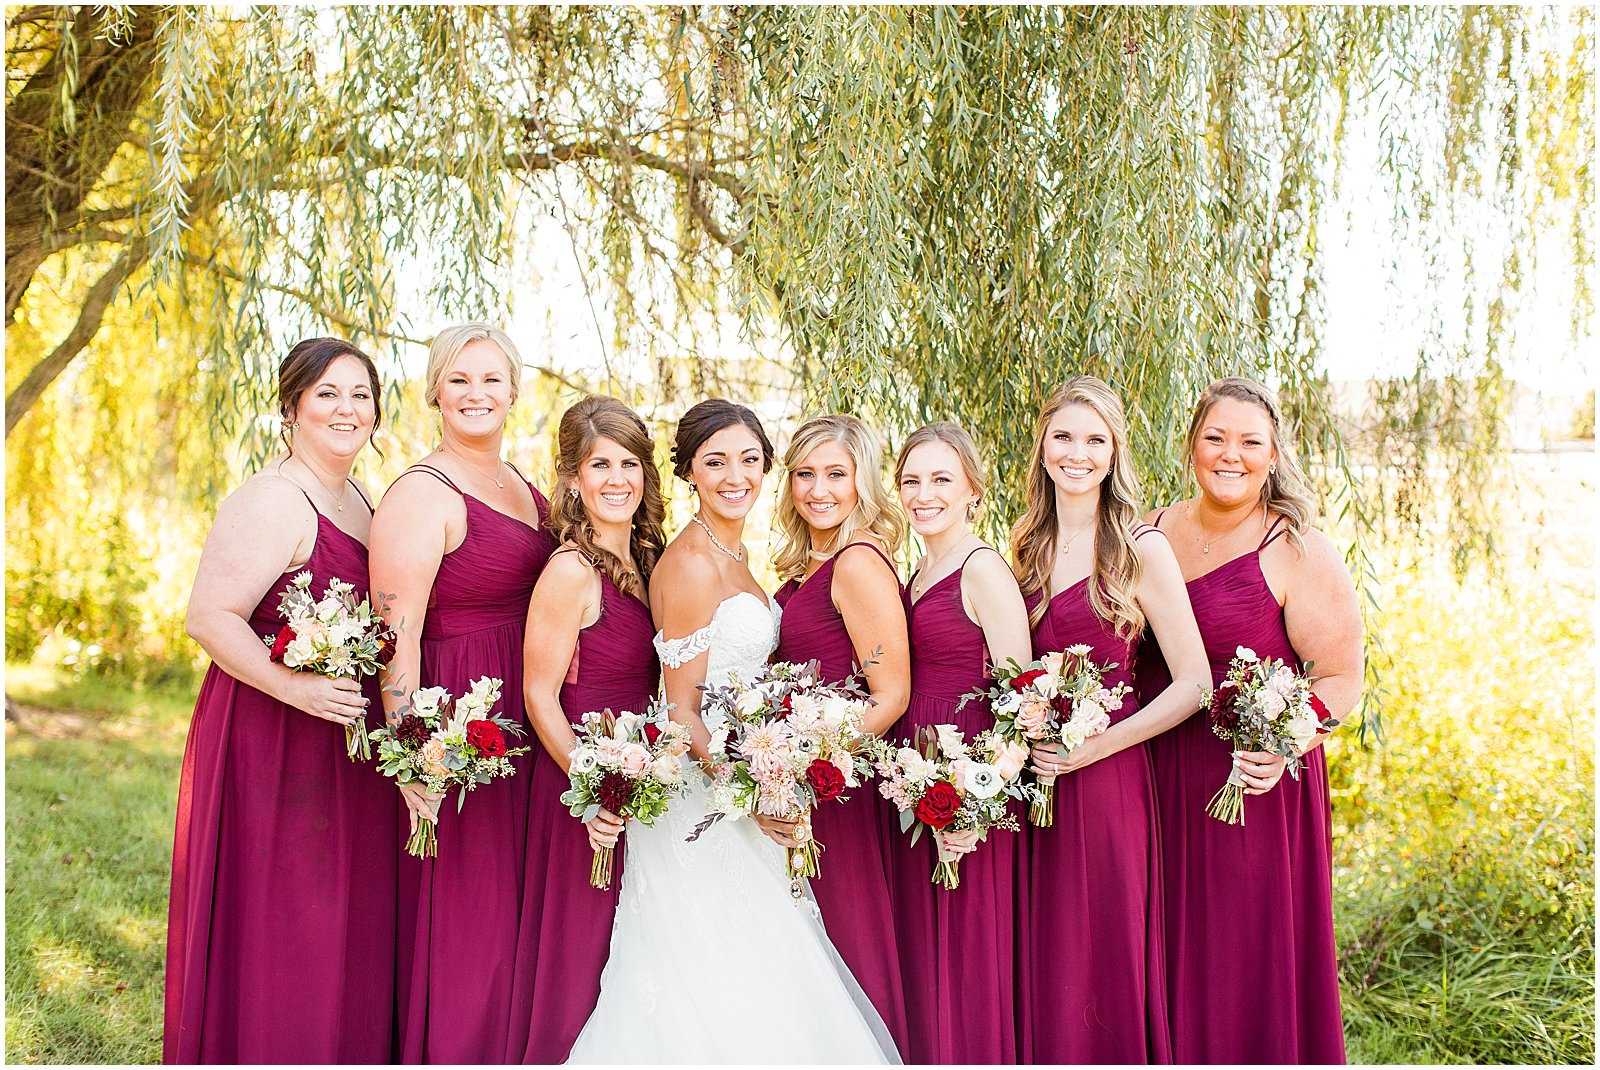 A Stunning Fall Wedding in Indianapolis, IN |. Sally and Andrew | Bret and Brandie Photography 0081.jpg